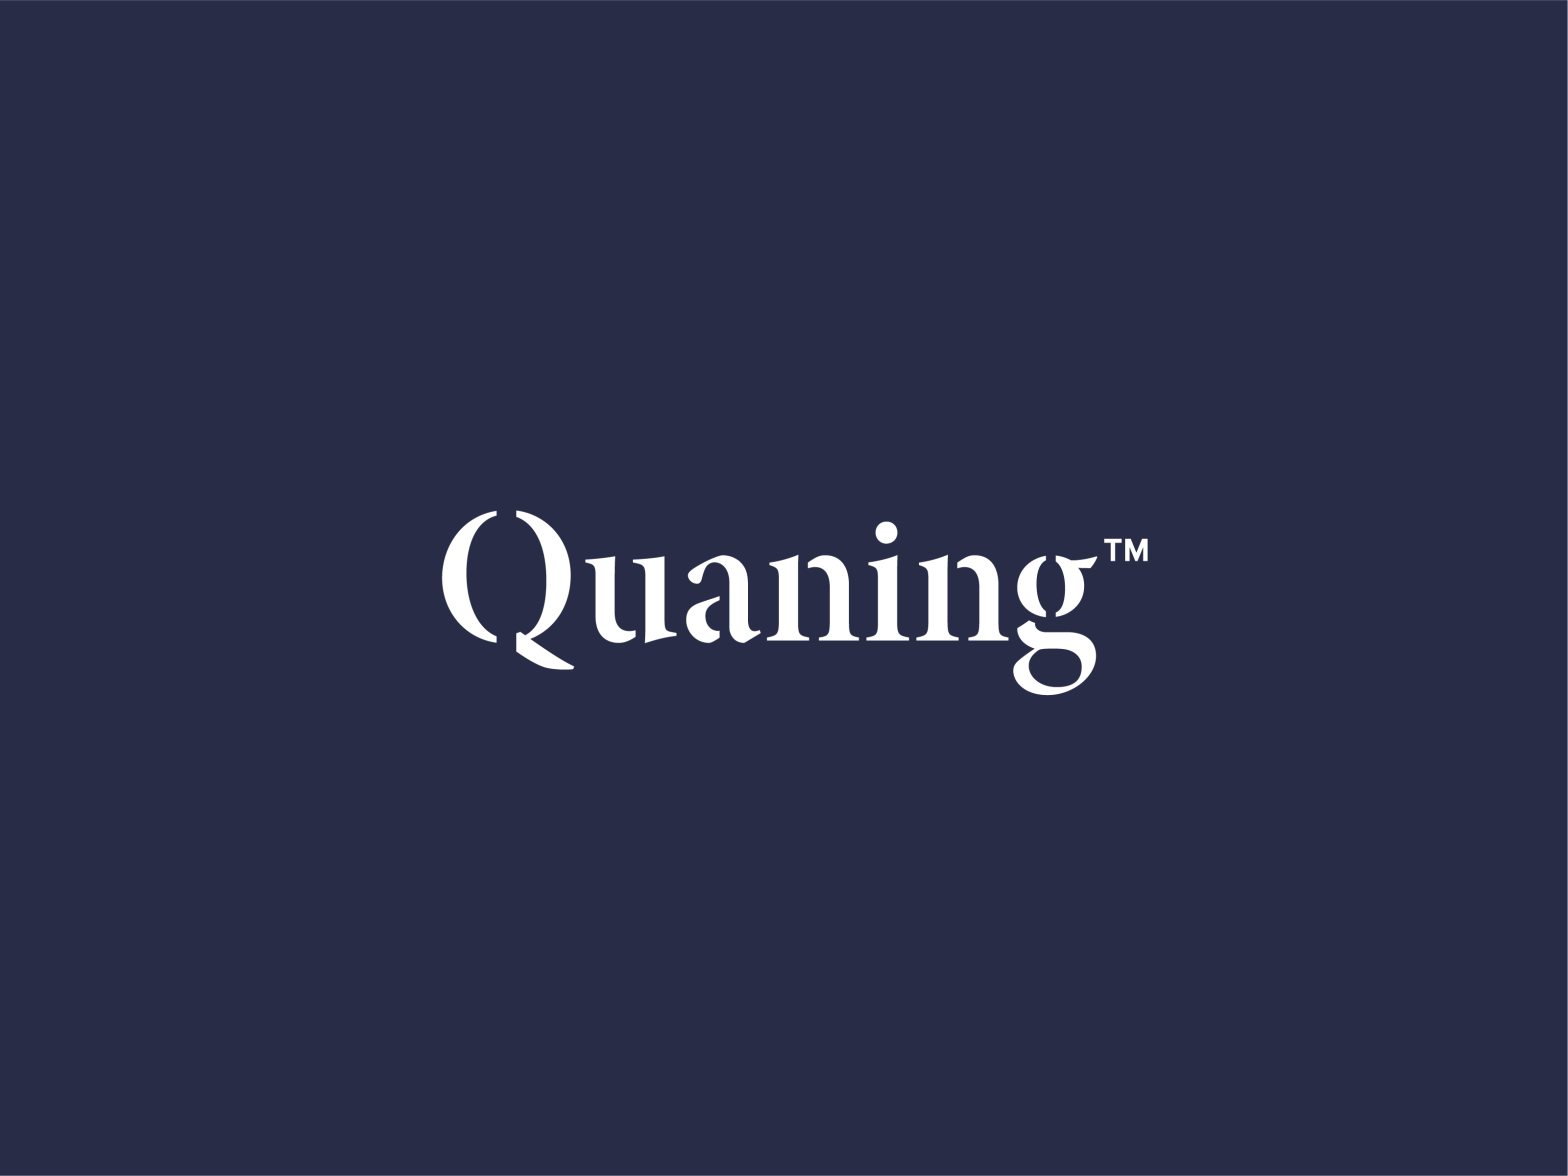 Branding – Quaning by Chris Zijlstra on Dribbble